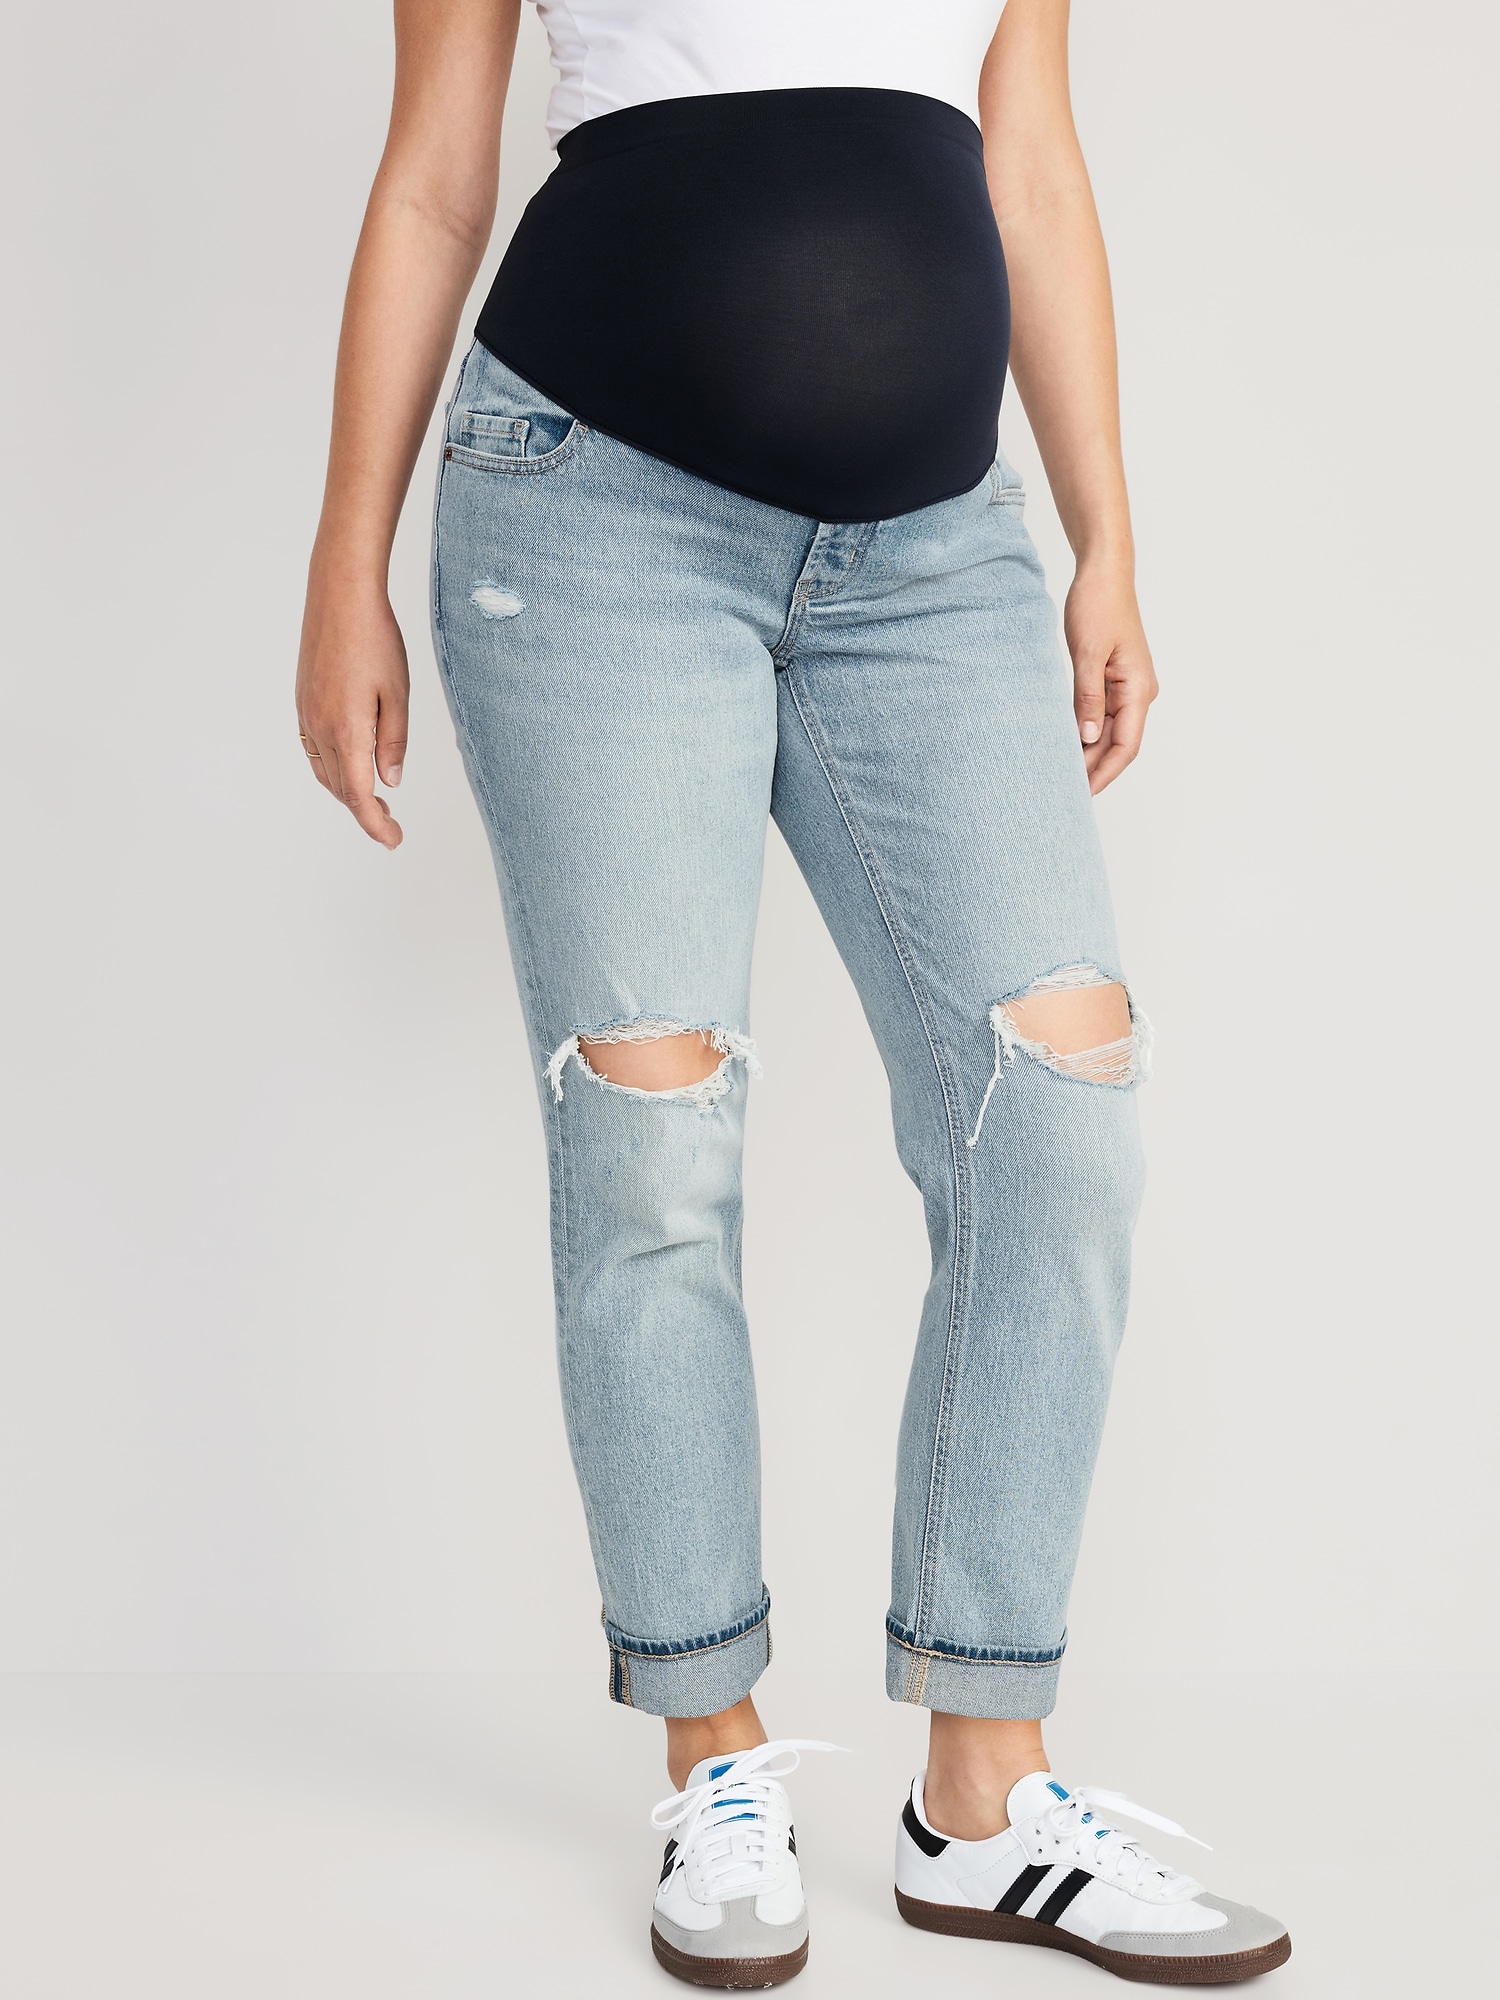 V VOCNI Maternity Jeans Women's Ripped Boyfriend Jeans Cute Distressed  Jeans Stretch Skinny Maternity Pants in Bahrain